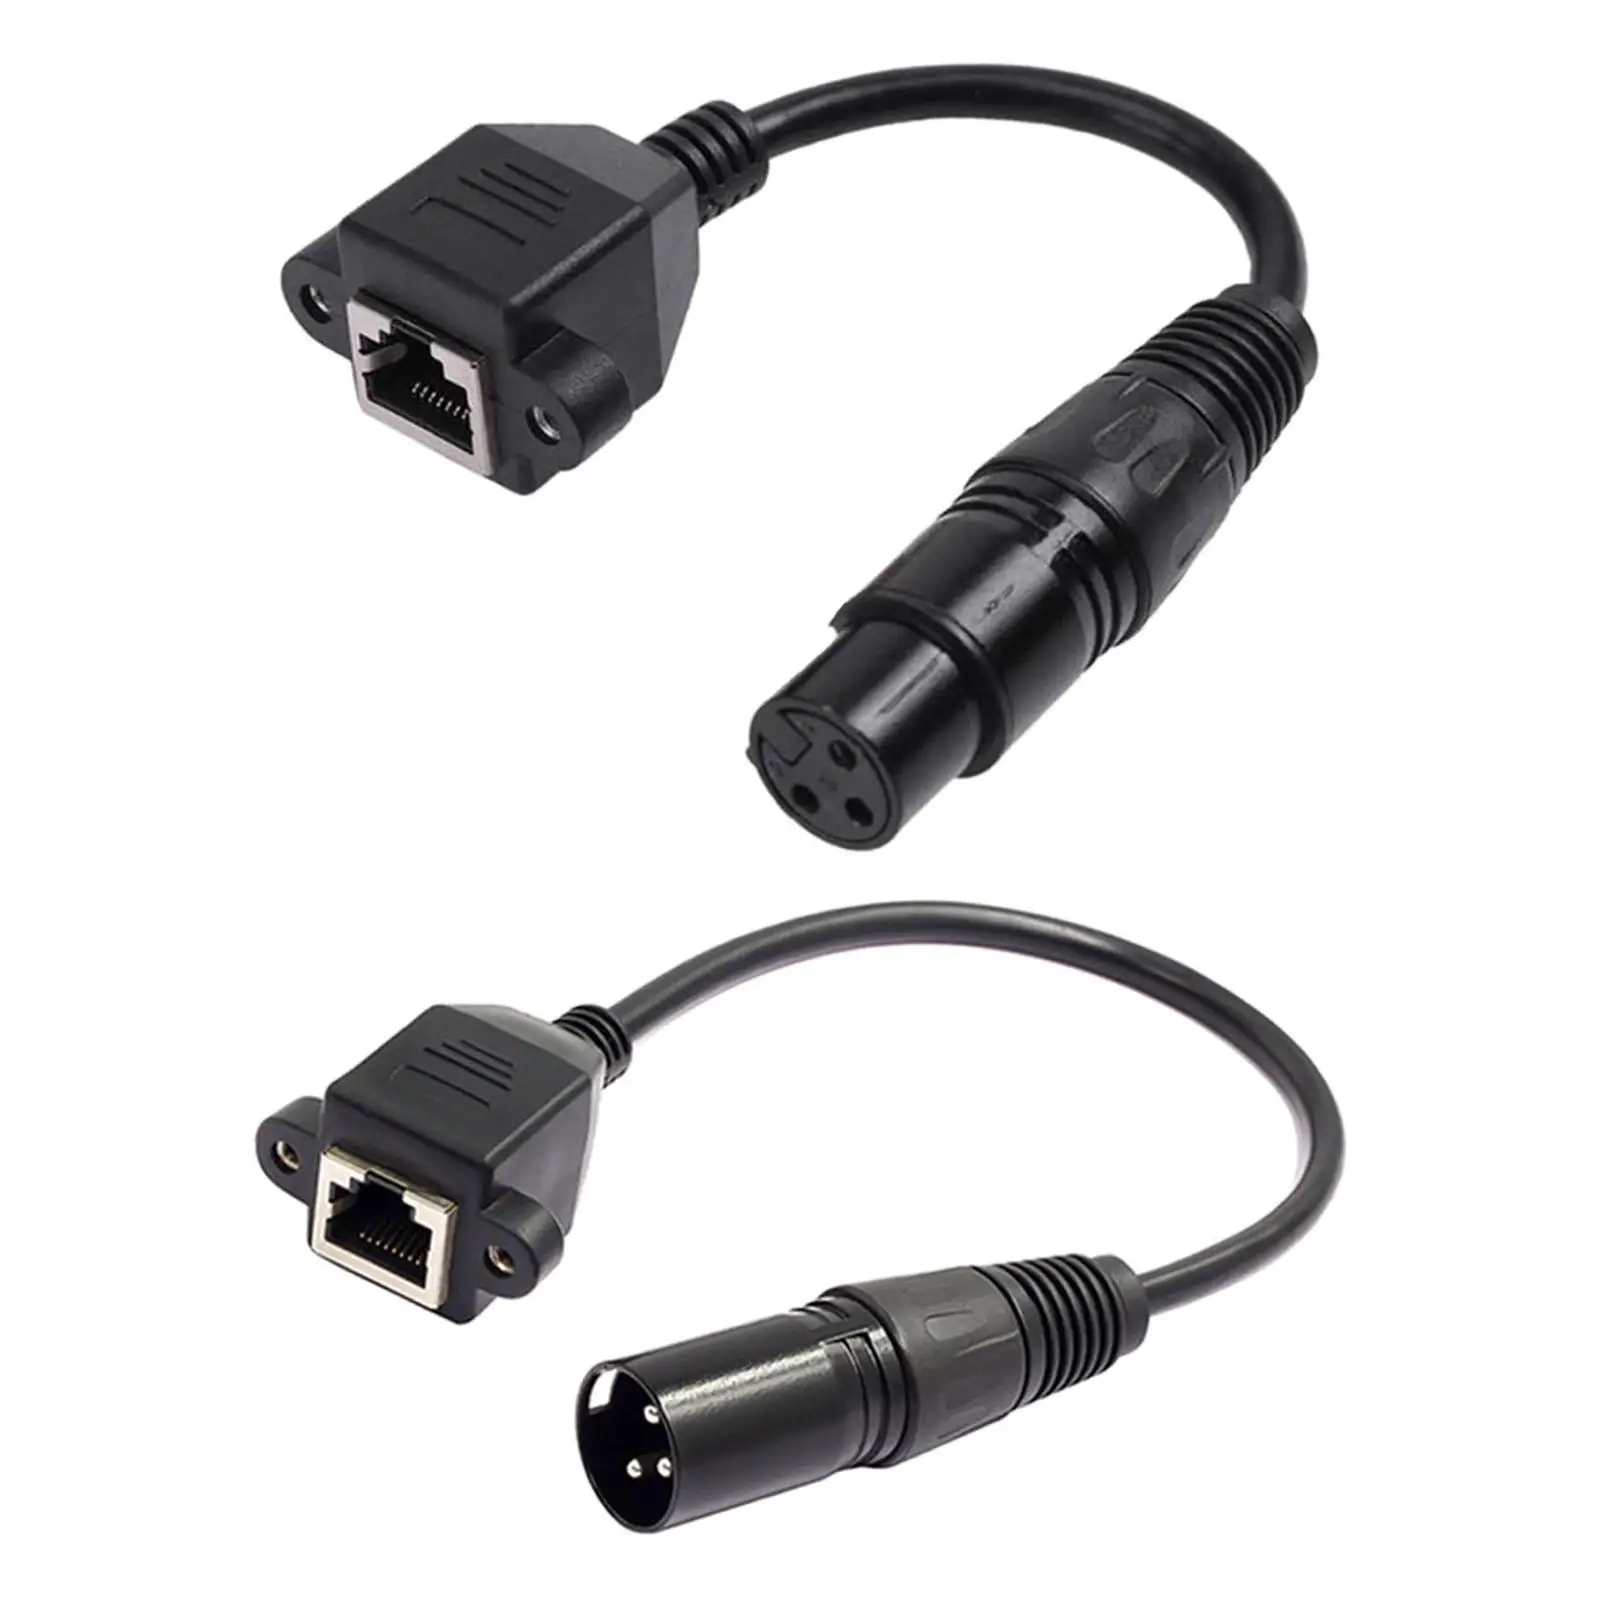 1 Pair 3 Pin XLR to RJ 45 Female Male Adapter Cables, Copper Extension Cable for Dmx Con Controller Series Amplifier Mixer 20cm